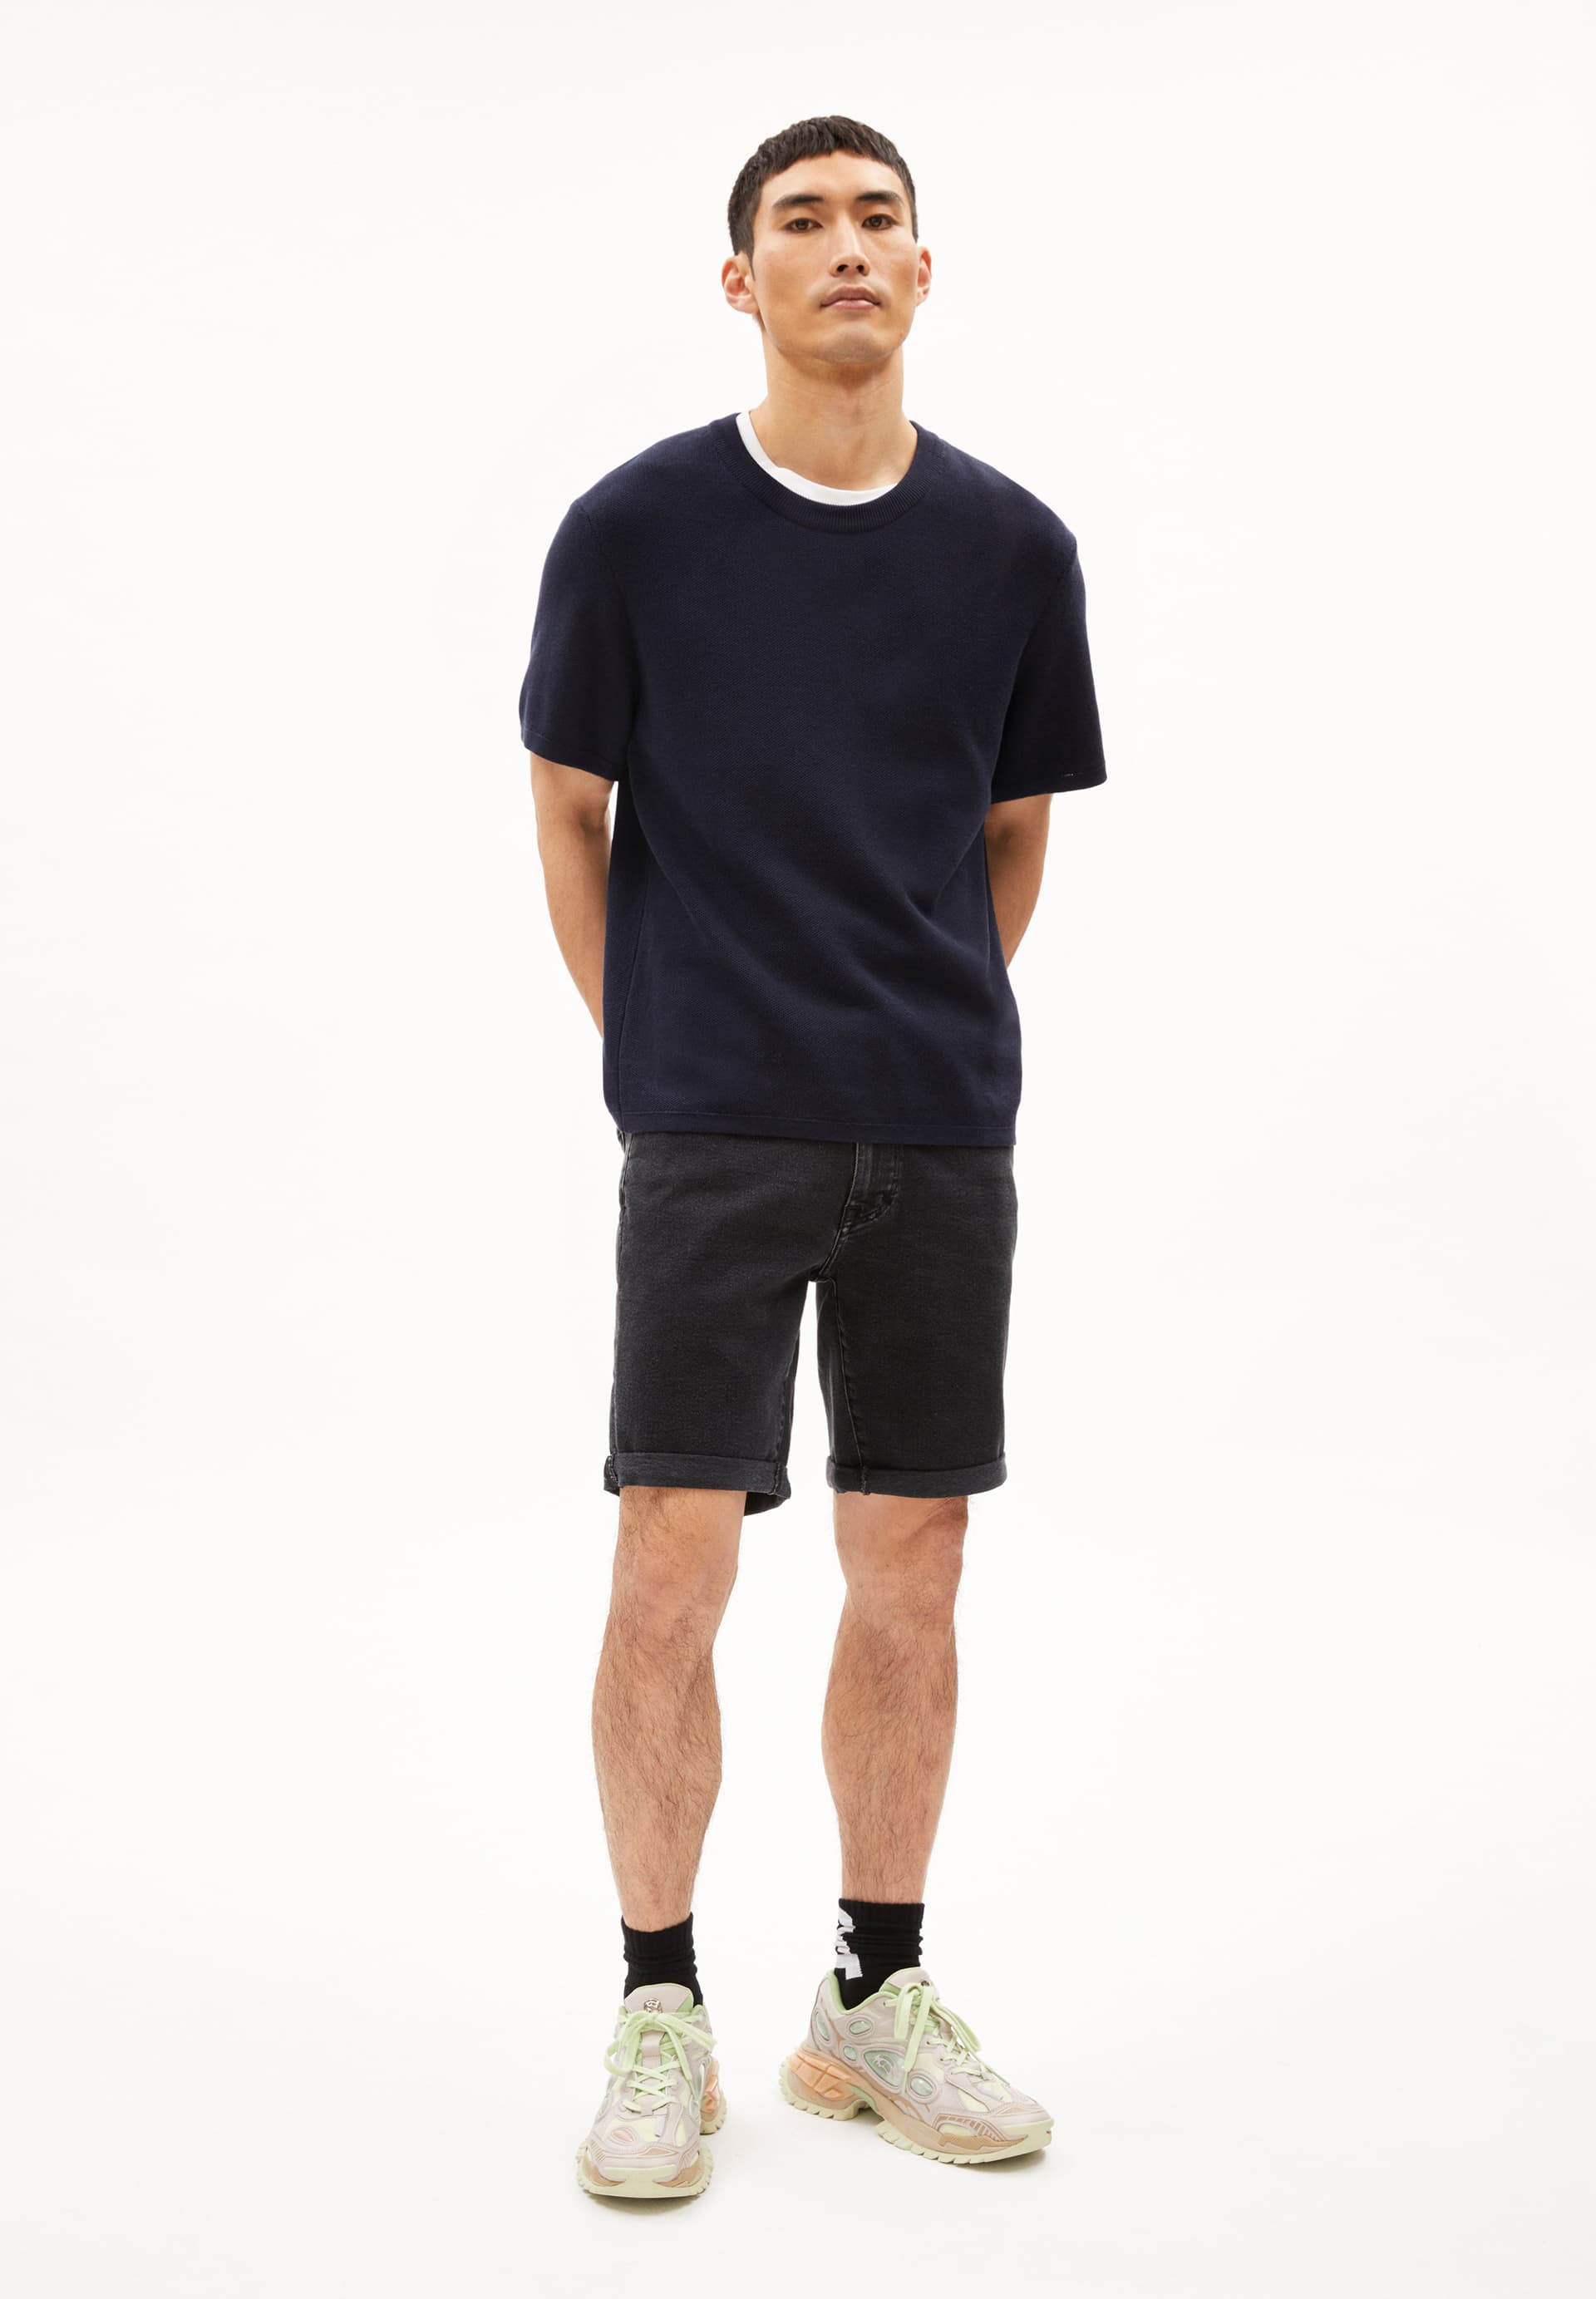 NAAILO BLACK DNM Denim Shorts made of recycled Cotton Mix